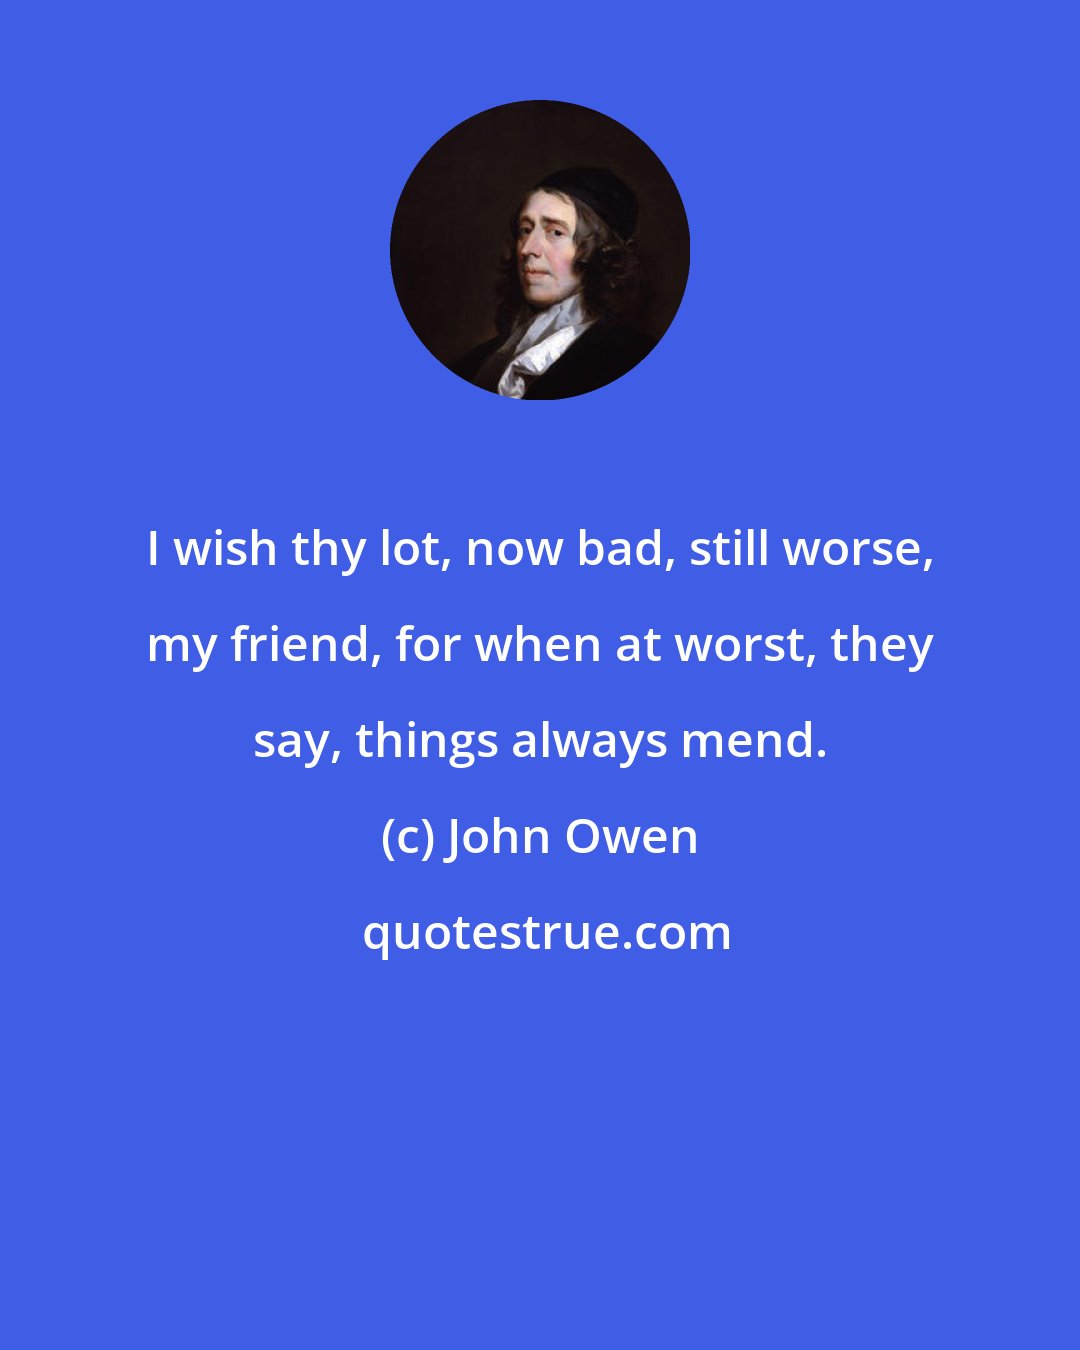 John Owen: I wish thy lot, now bad, still worse, my friend, for when at worst, they say, things always mend.